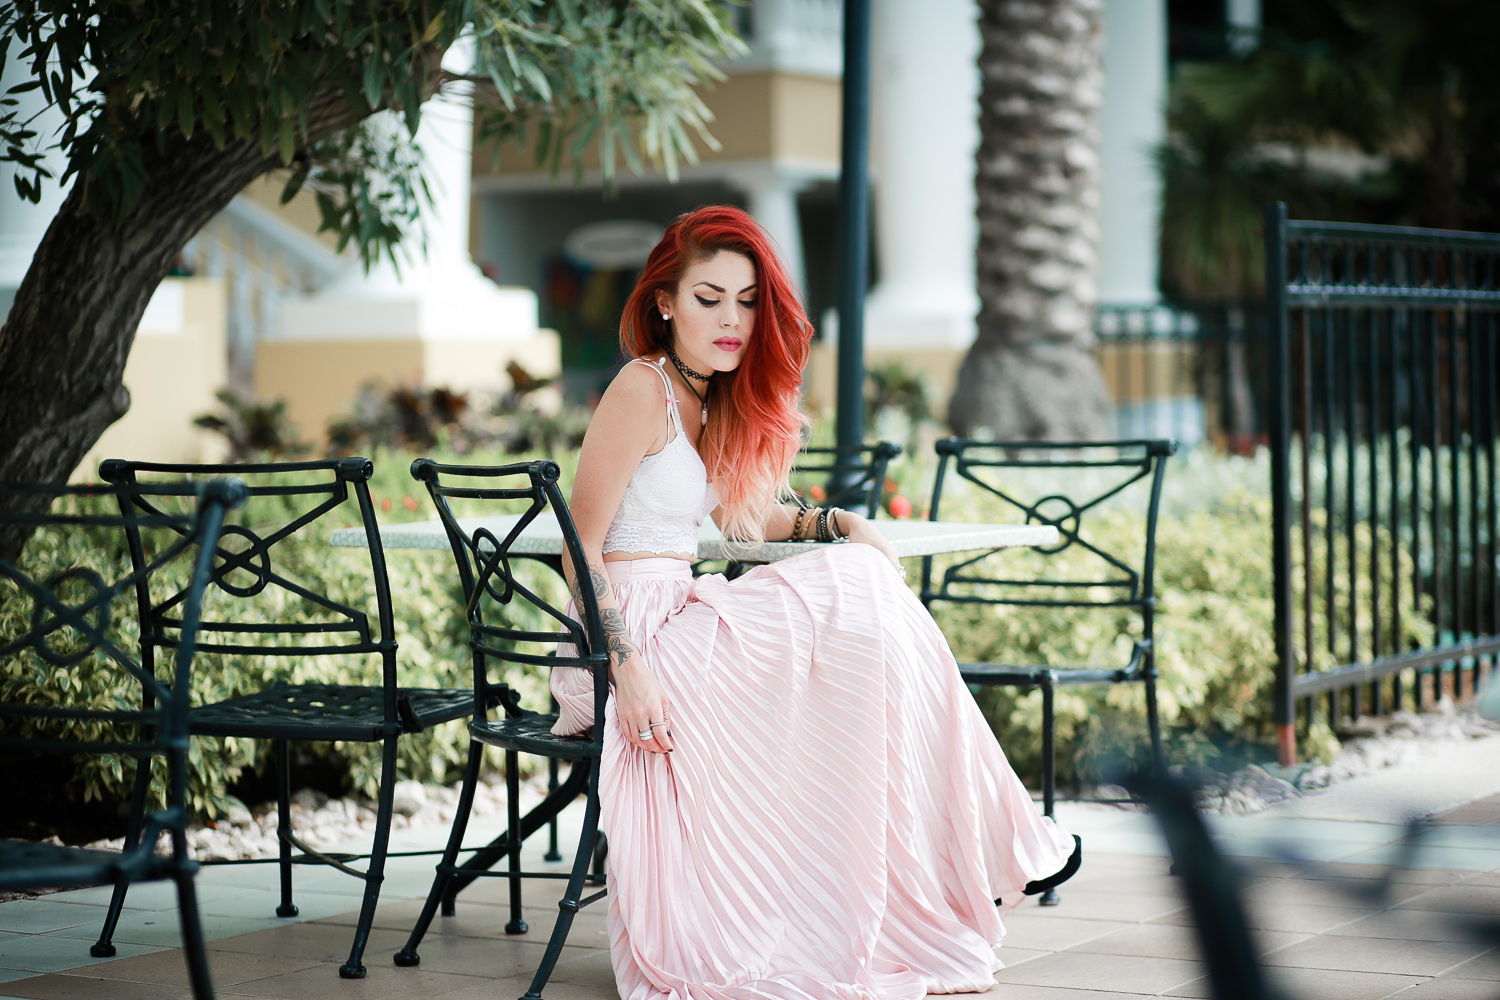 Le Happy wearing pastel pleated skirt on Curacao